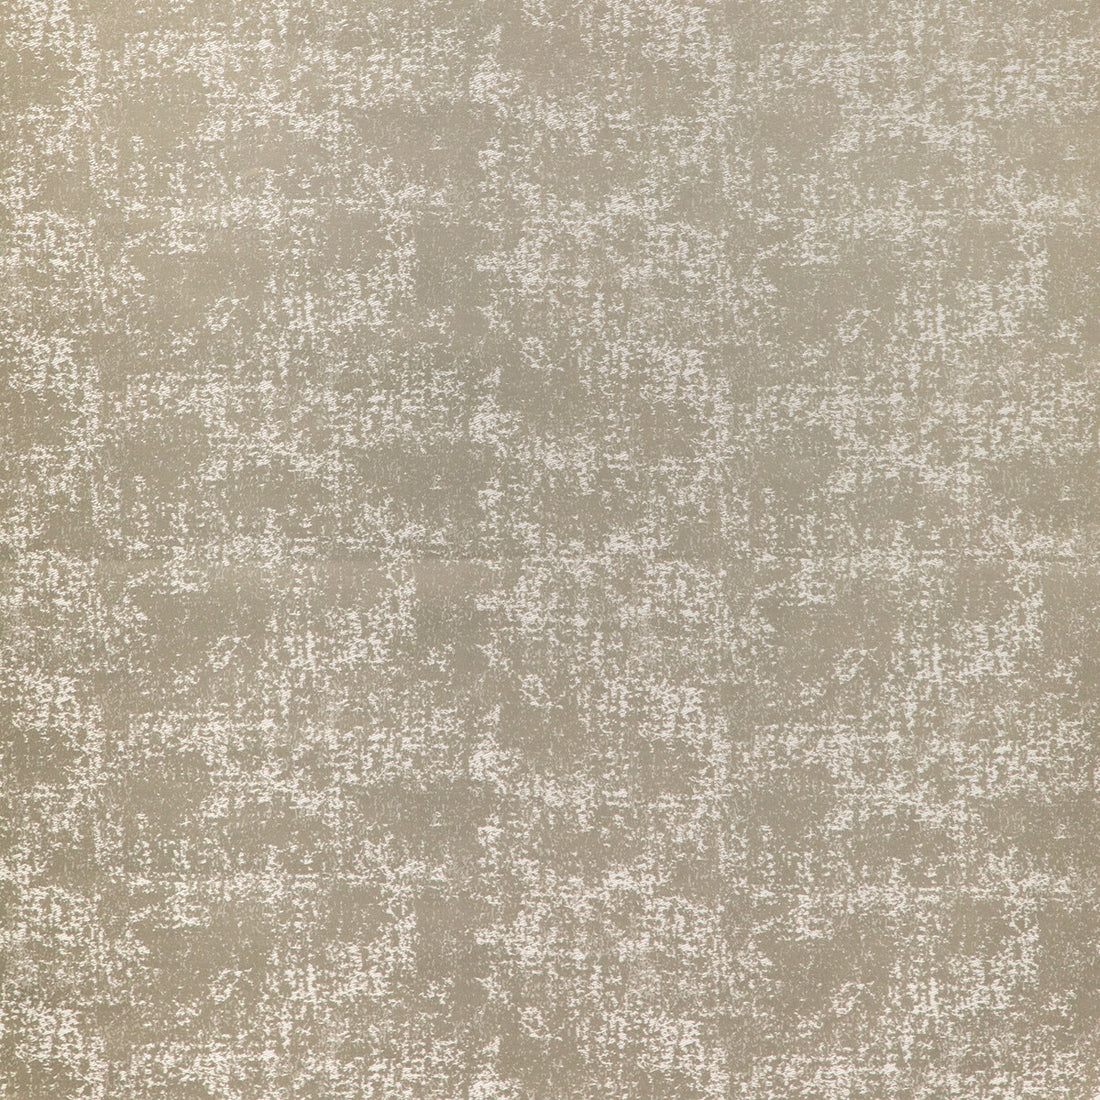 Kravet Contract fabric in 90006-16 color - pattern 90006.16.0 - by Kravet Contract in the Fr Window Blackout Drapery III collection